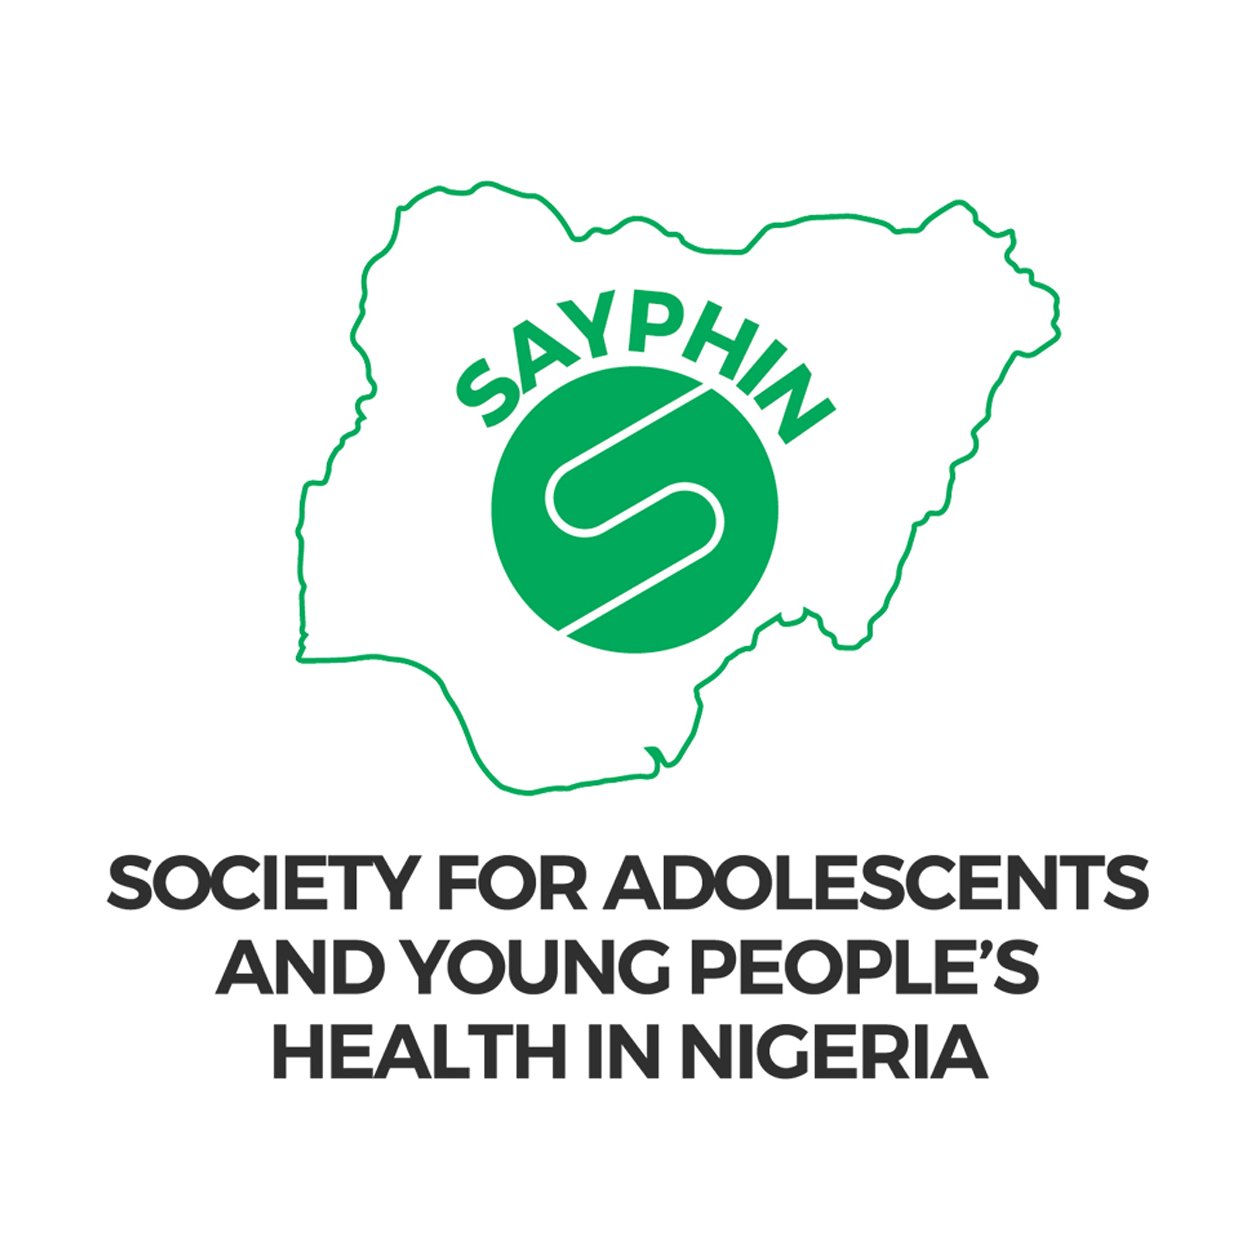 We are passionate about promoting the dignity, competencies, capacities & active involvement of young people in national health & development agenda.